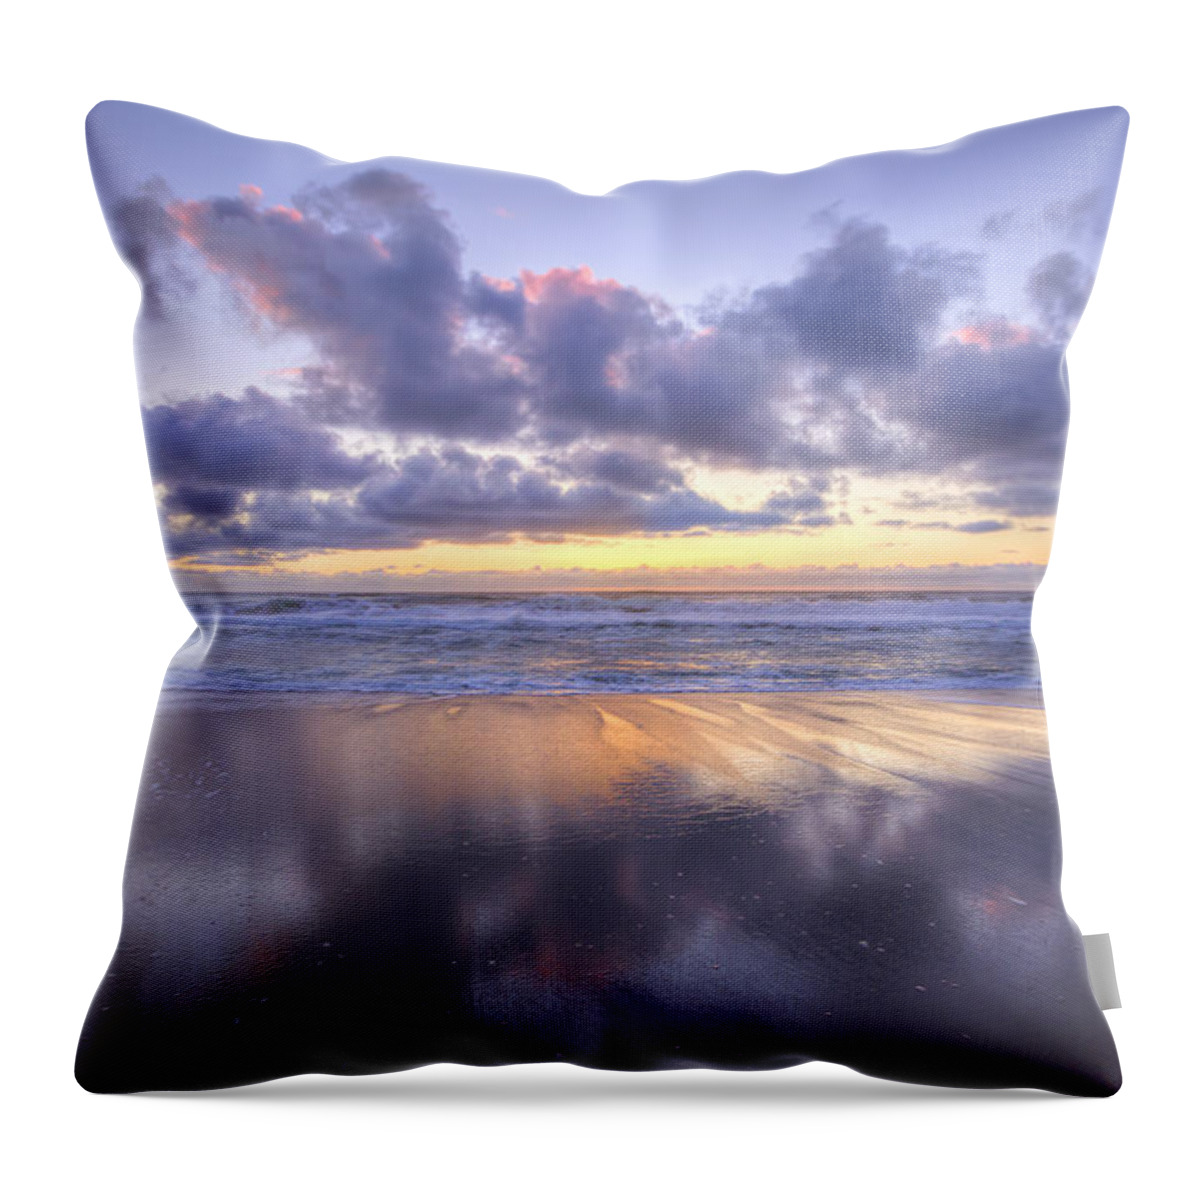 Landscape Throw Pillow featuring the photograph Evening Colors by Kristina Rinell